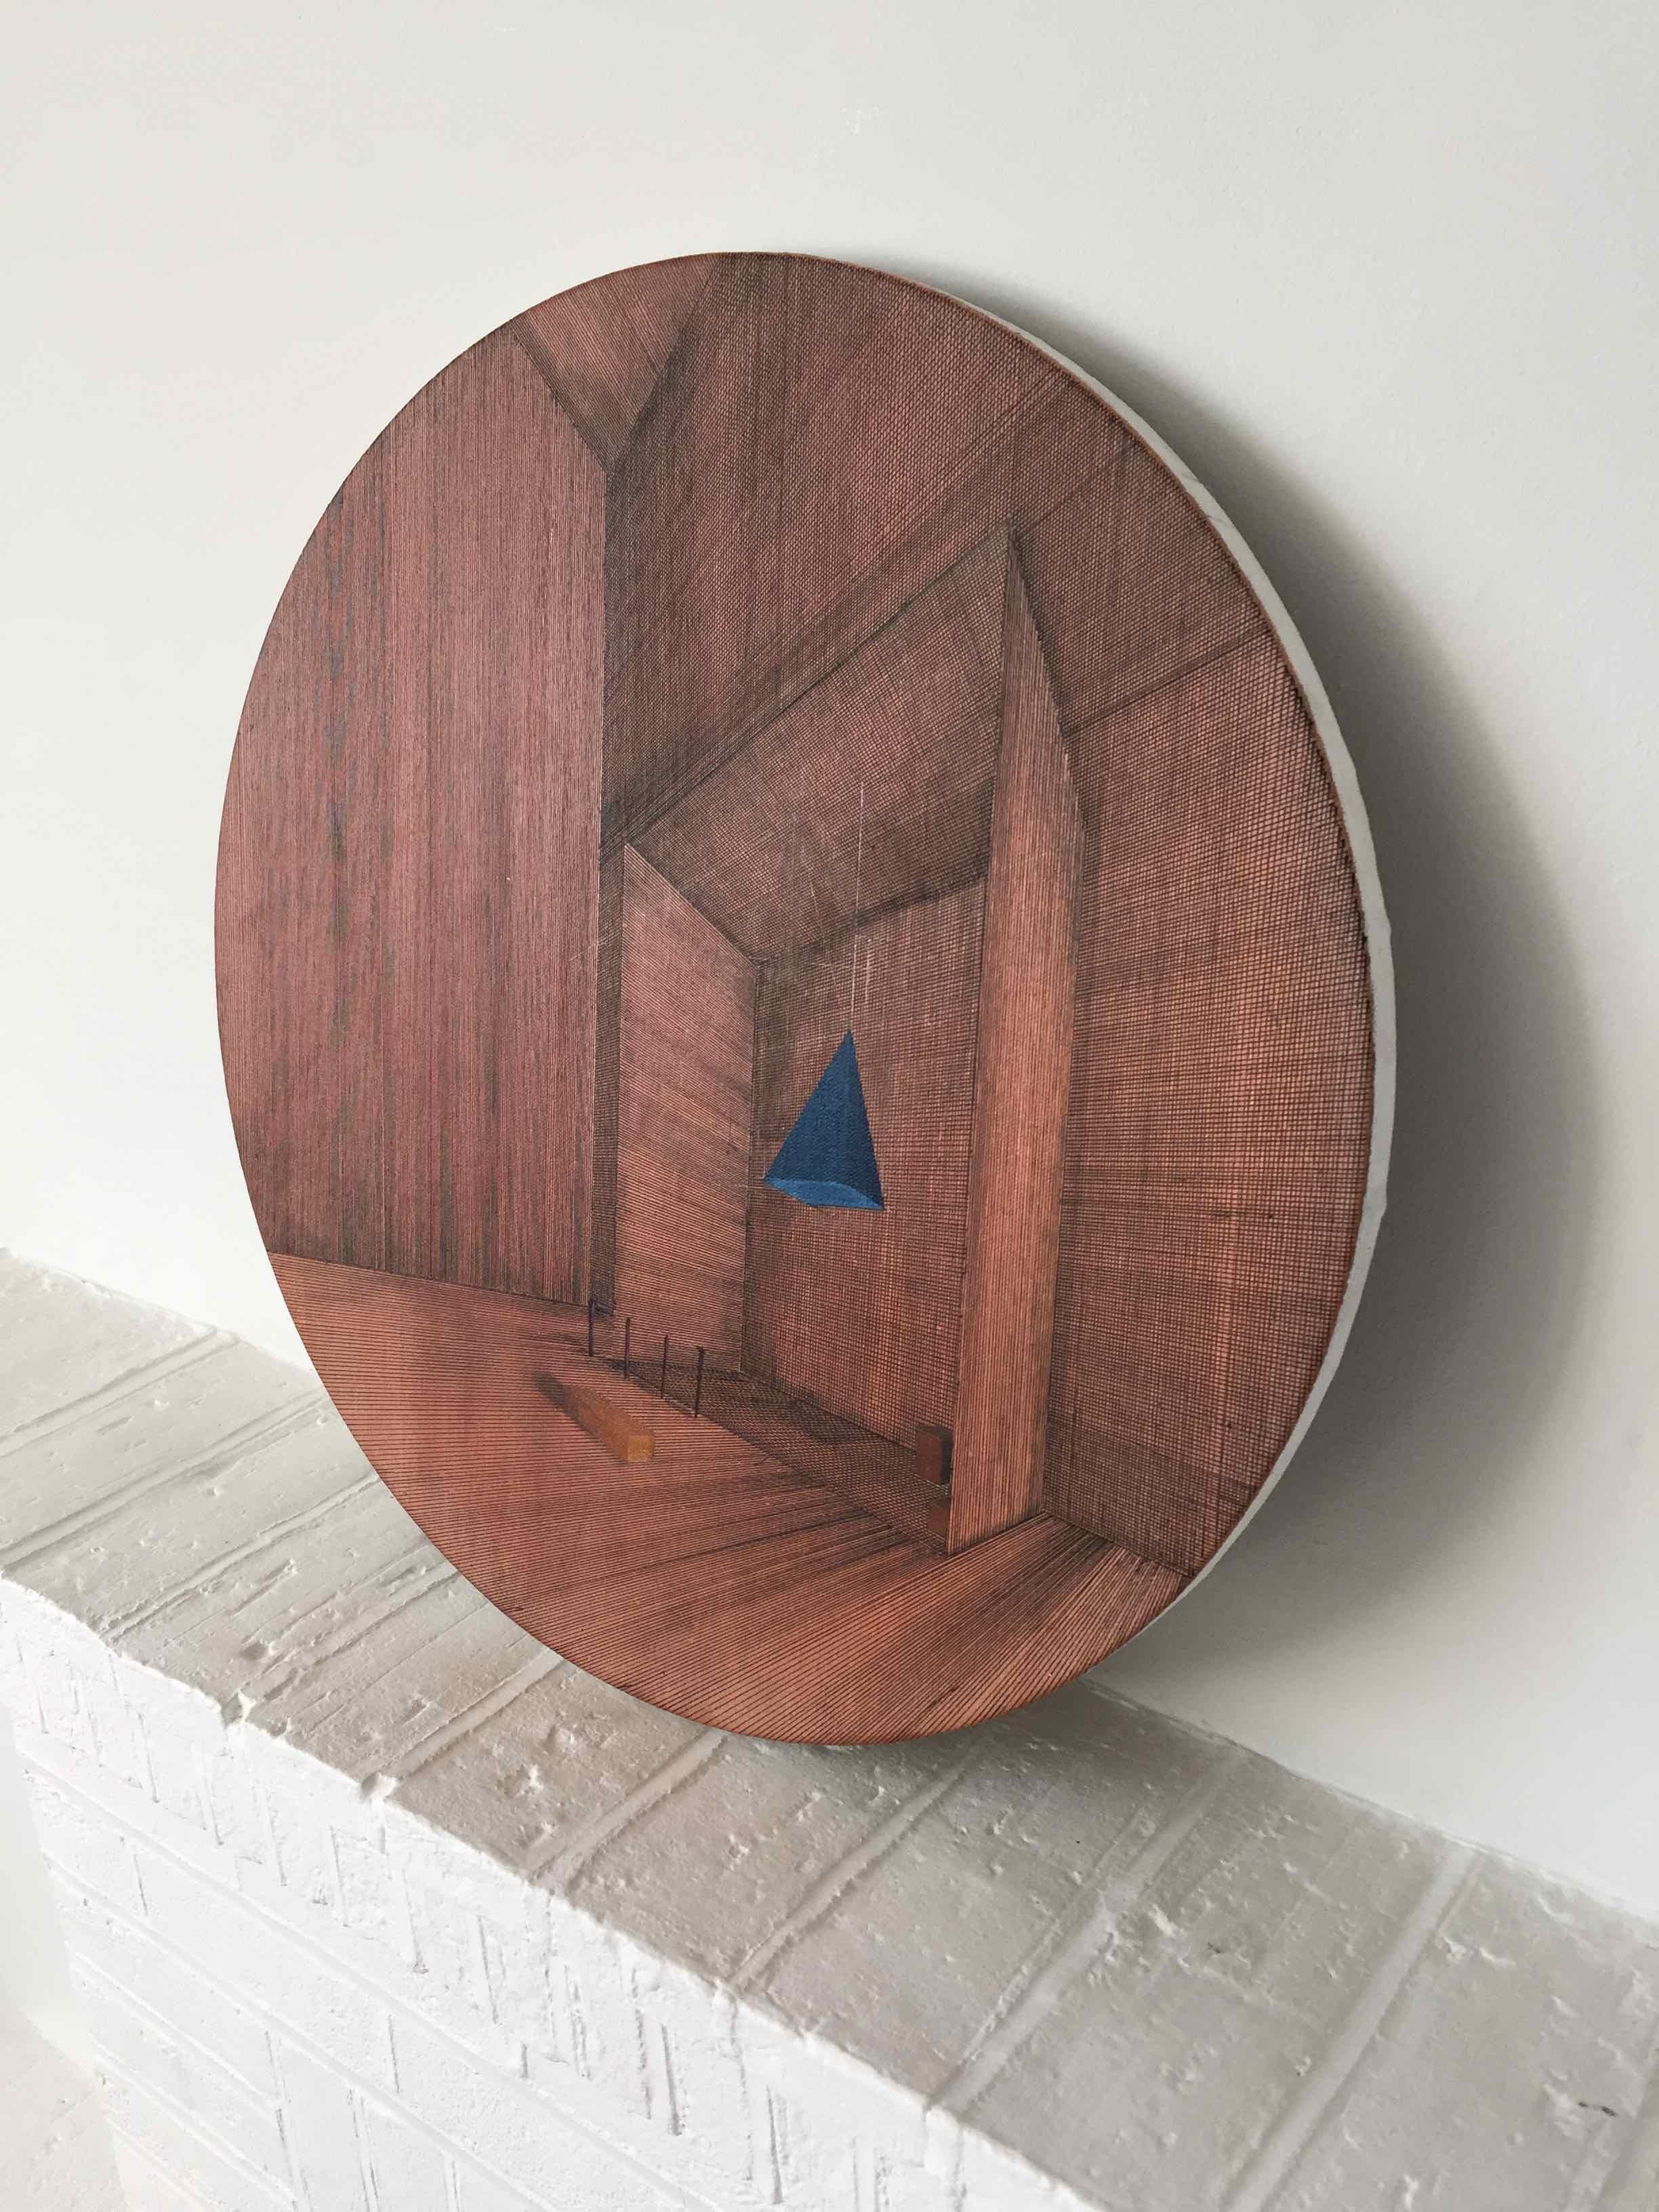 Hung, 2014, Oil, acrylic and pen on canvas on board, 13 4/5 in diameter; 35 cm diameter by Joella Wheatley

This perfectly round drawing/painting sits flat on the wall and the viewer is invited to move in close to examine the fine perspective line